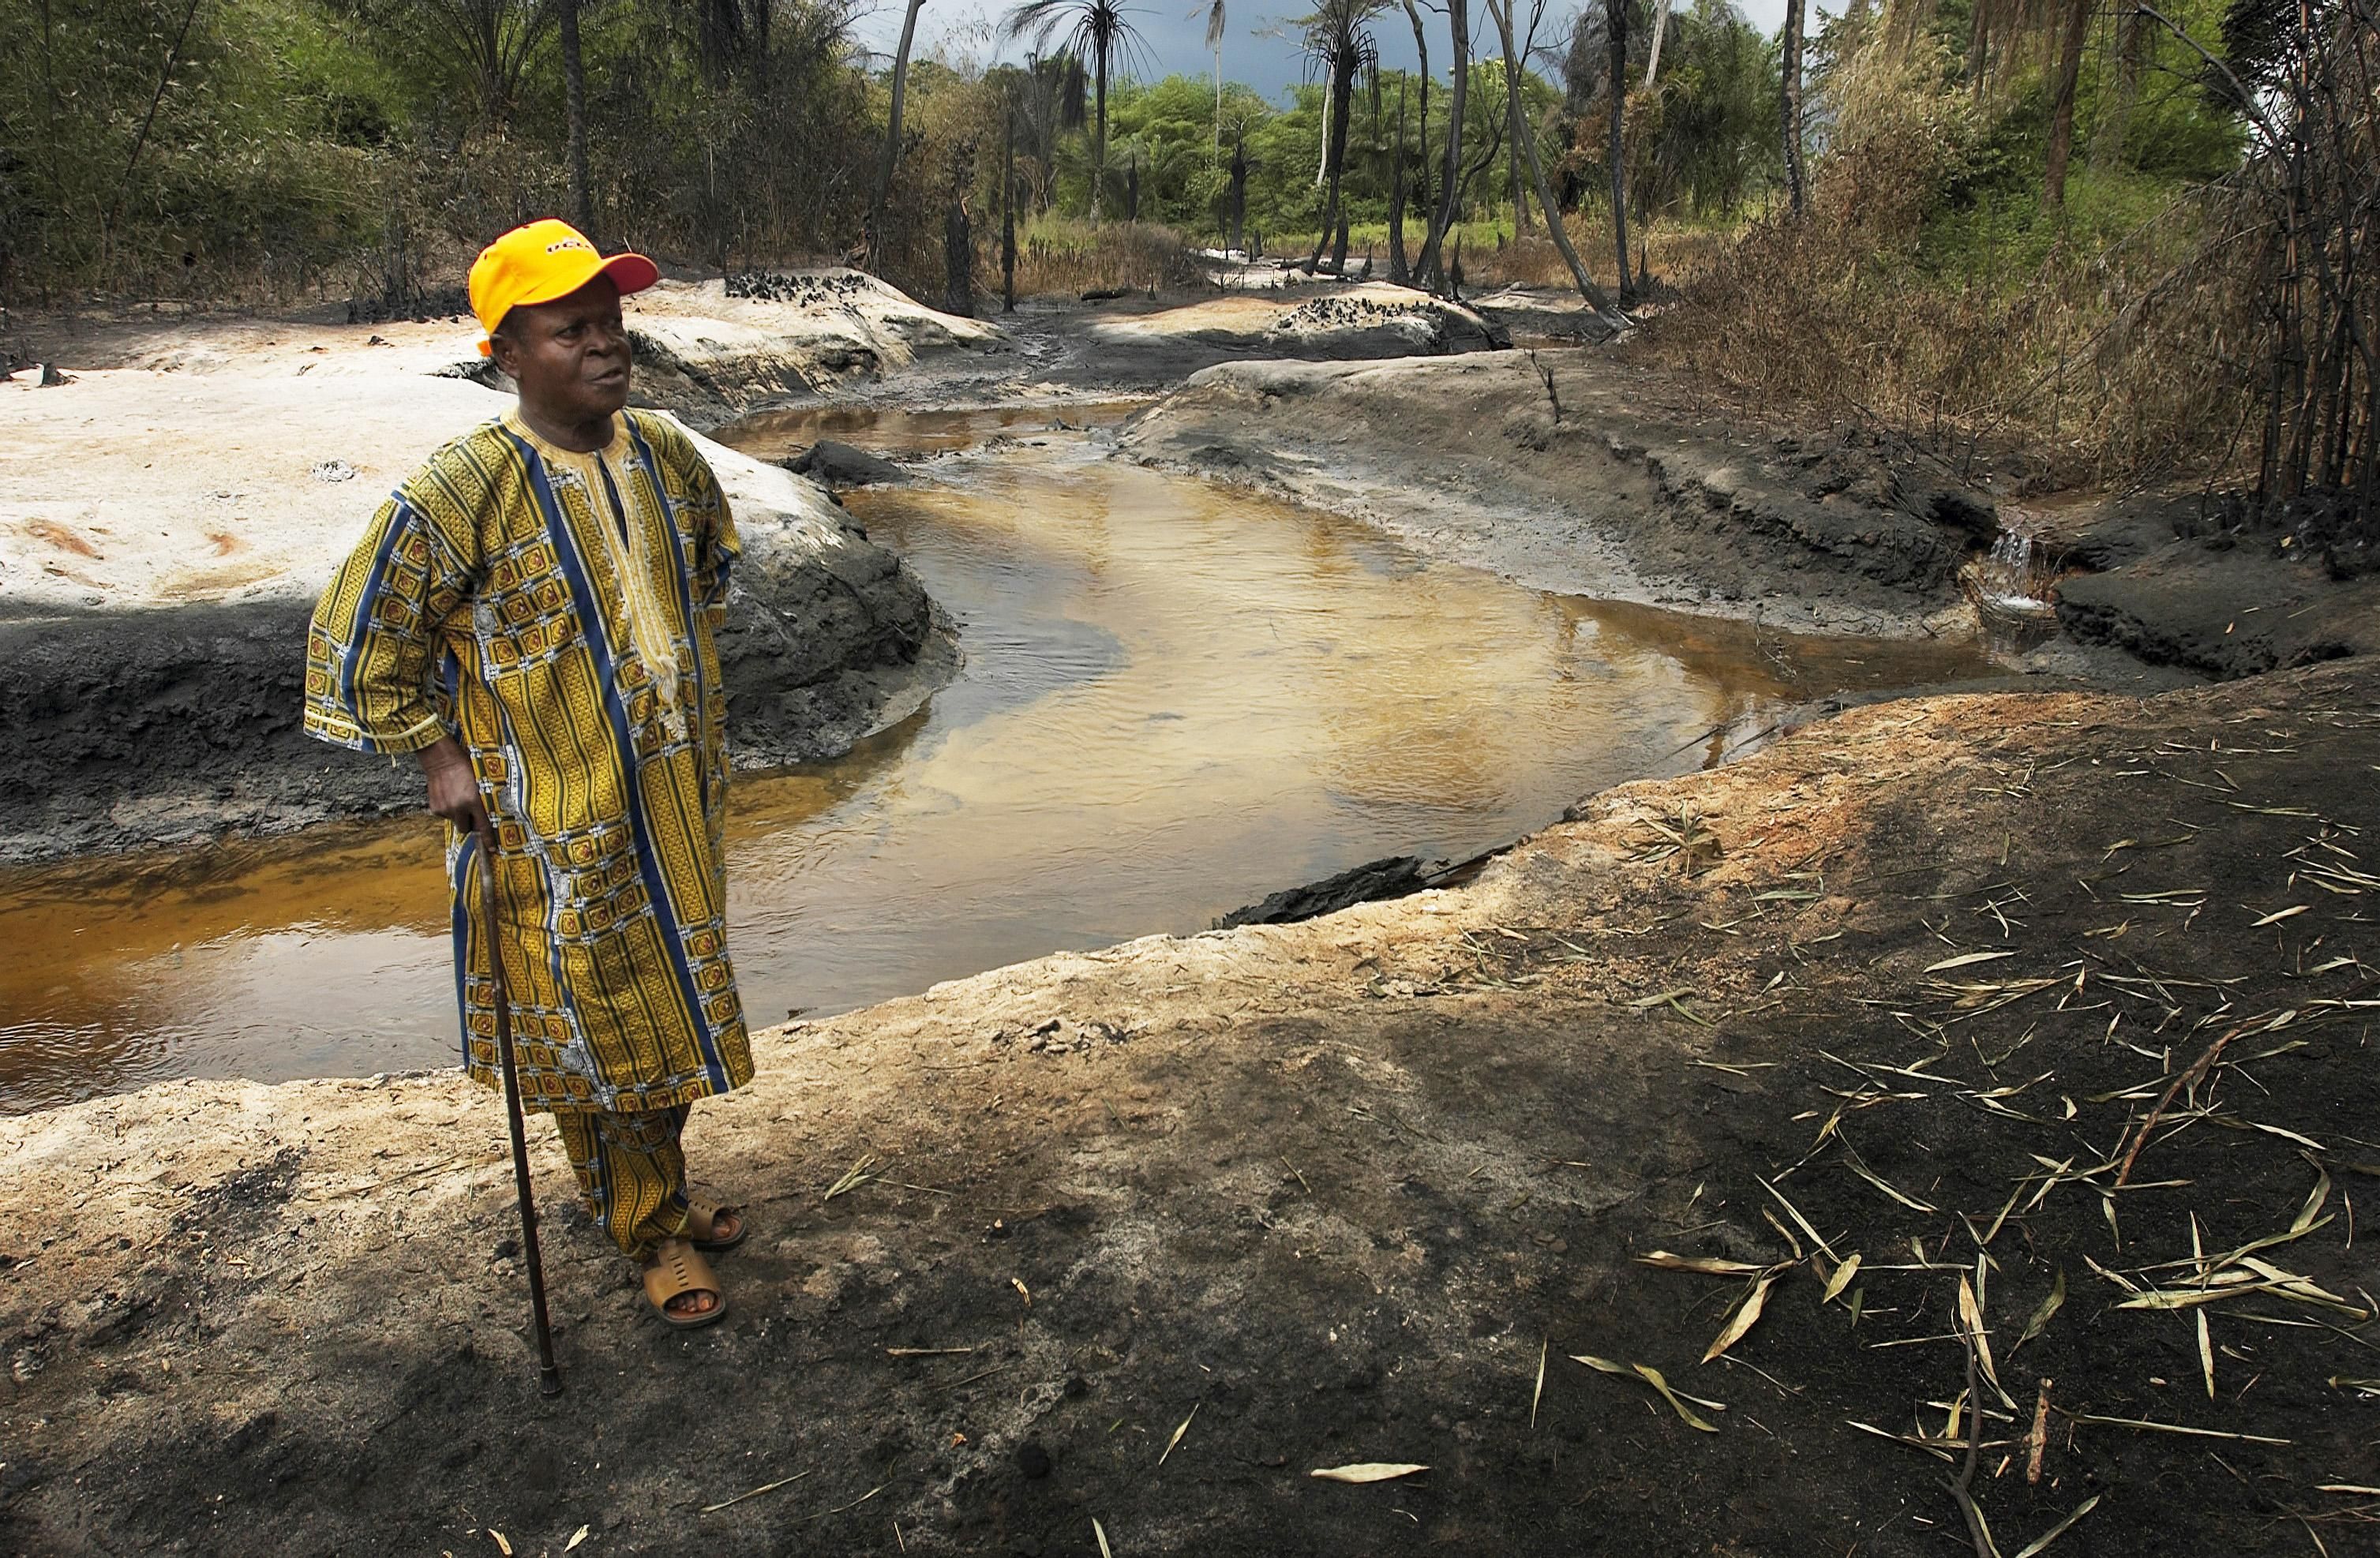 After more than six decades of oil exploitation in the Niger Delta, the region now ranks as one of the top ten most polluted places on earth. Water bodies, soils, and the air have all been stoked full of harmful pollutants, and life expectancy now stands at a dreary 41 years. (Photo: Jacob Silberberg via Getty Images)